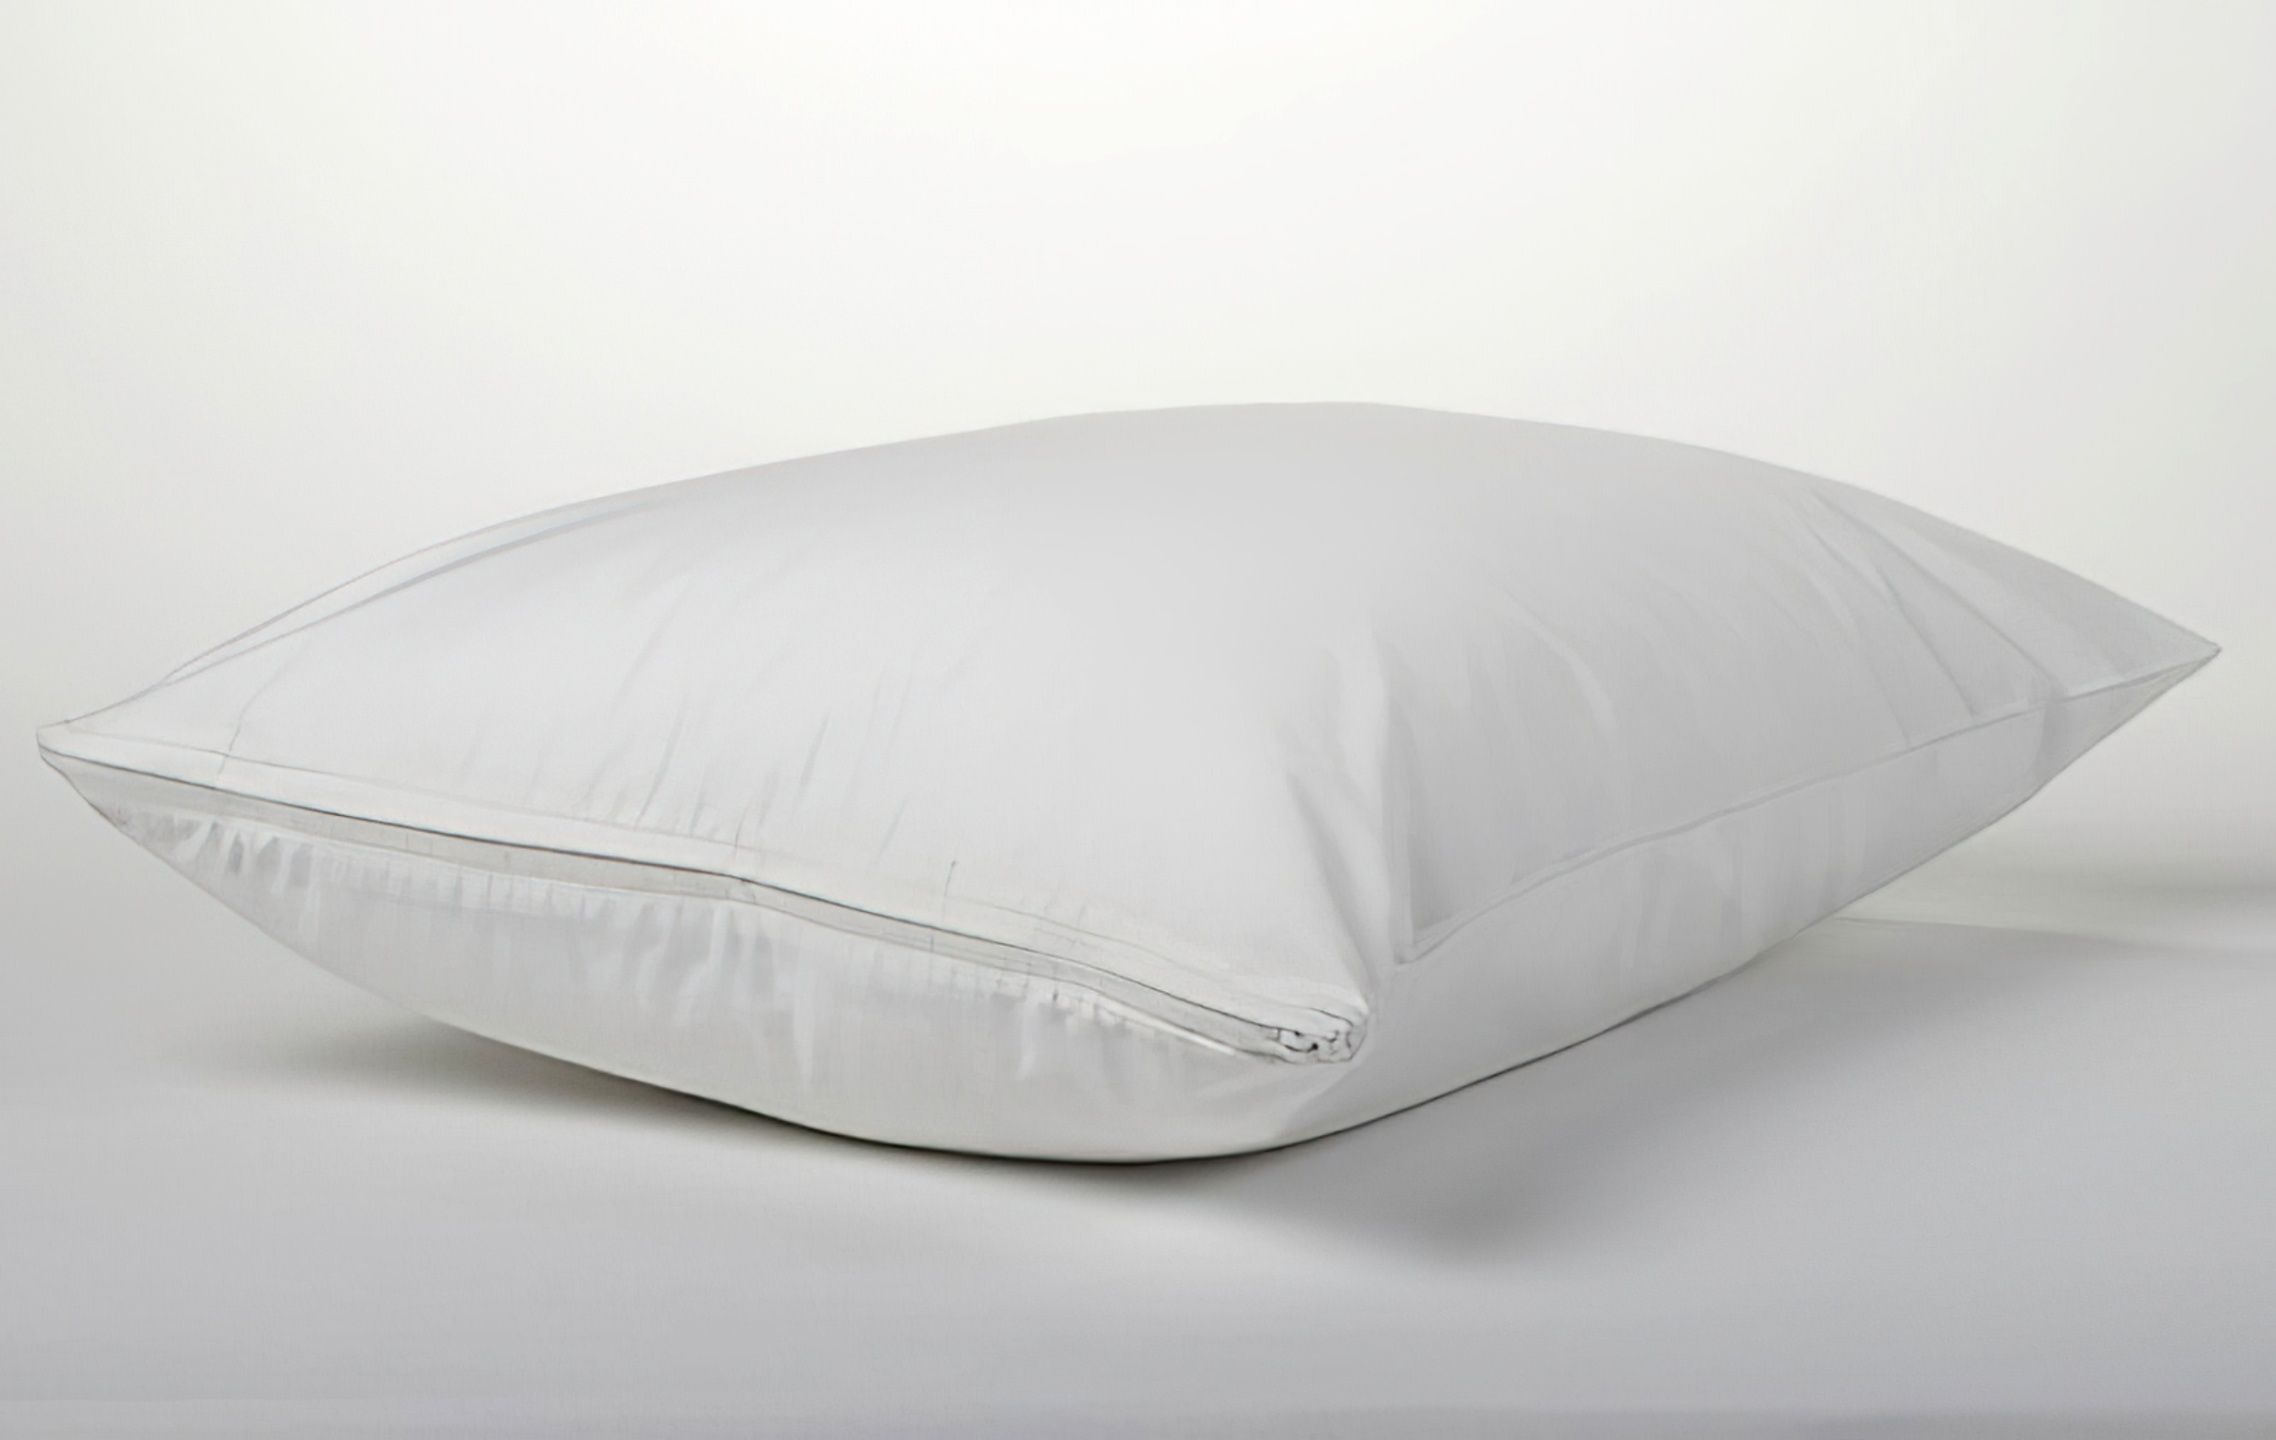 https://www.thecleanbedroom.com/cdn-cgi/image/width=2276,height=1440,fit=scale-down,quality=80,format=auto,onerror=redirect,metadata=none/wp-content/uploads/products/35/coyuchi-pillow-protector--35-.jpg